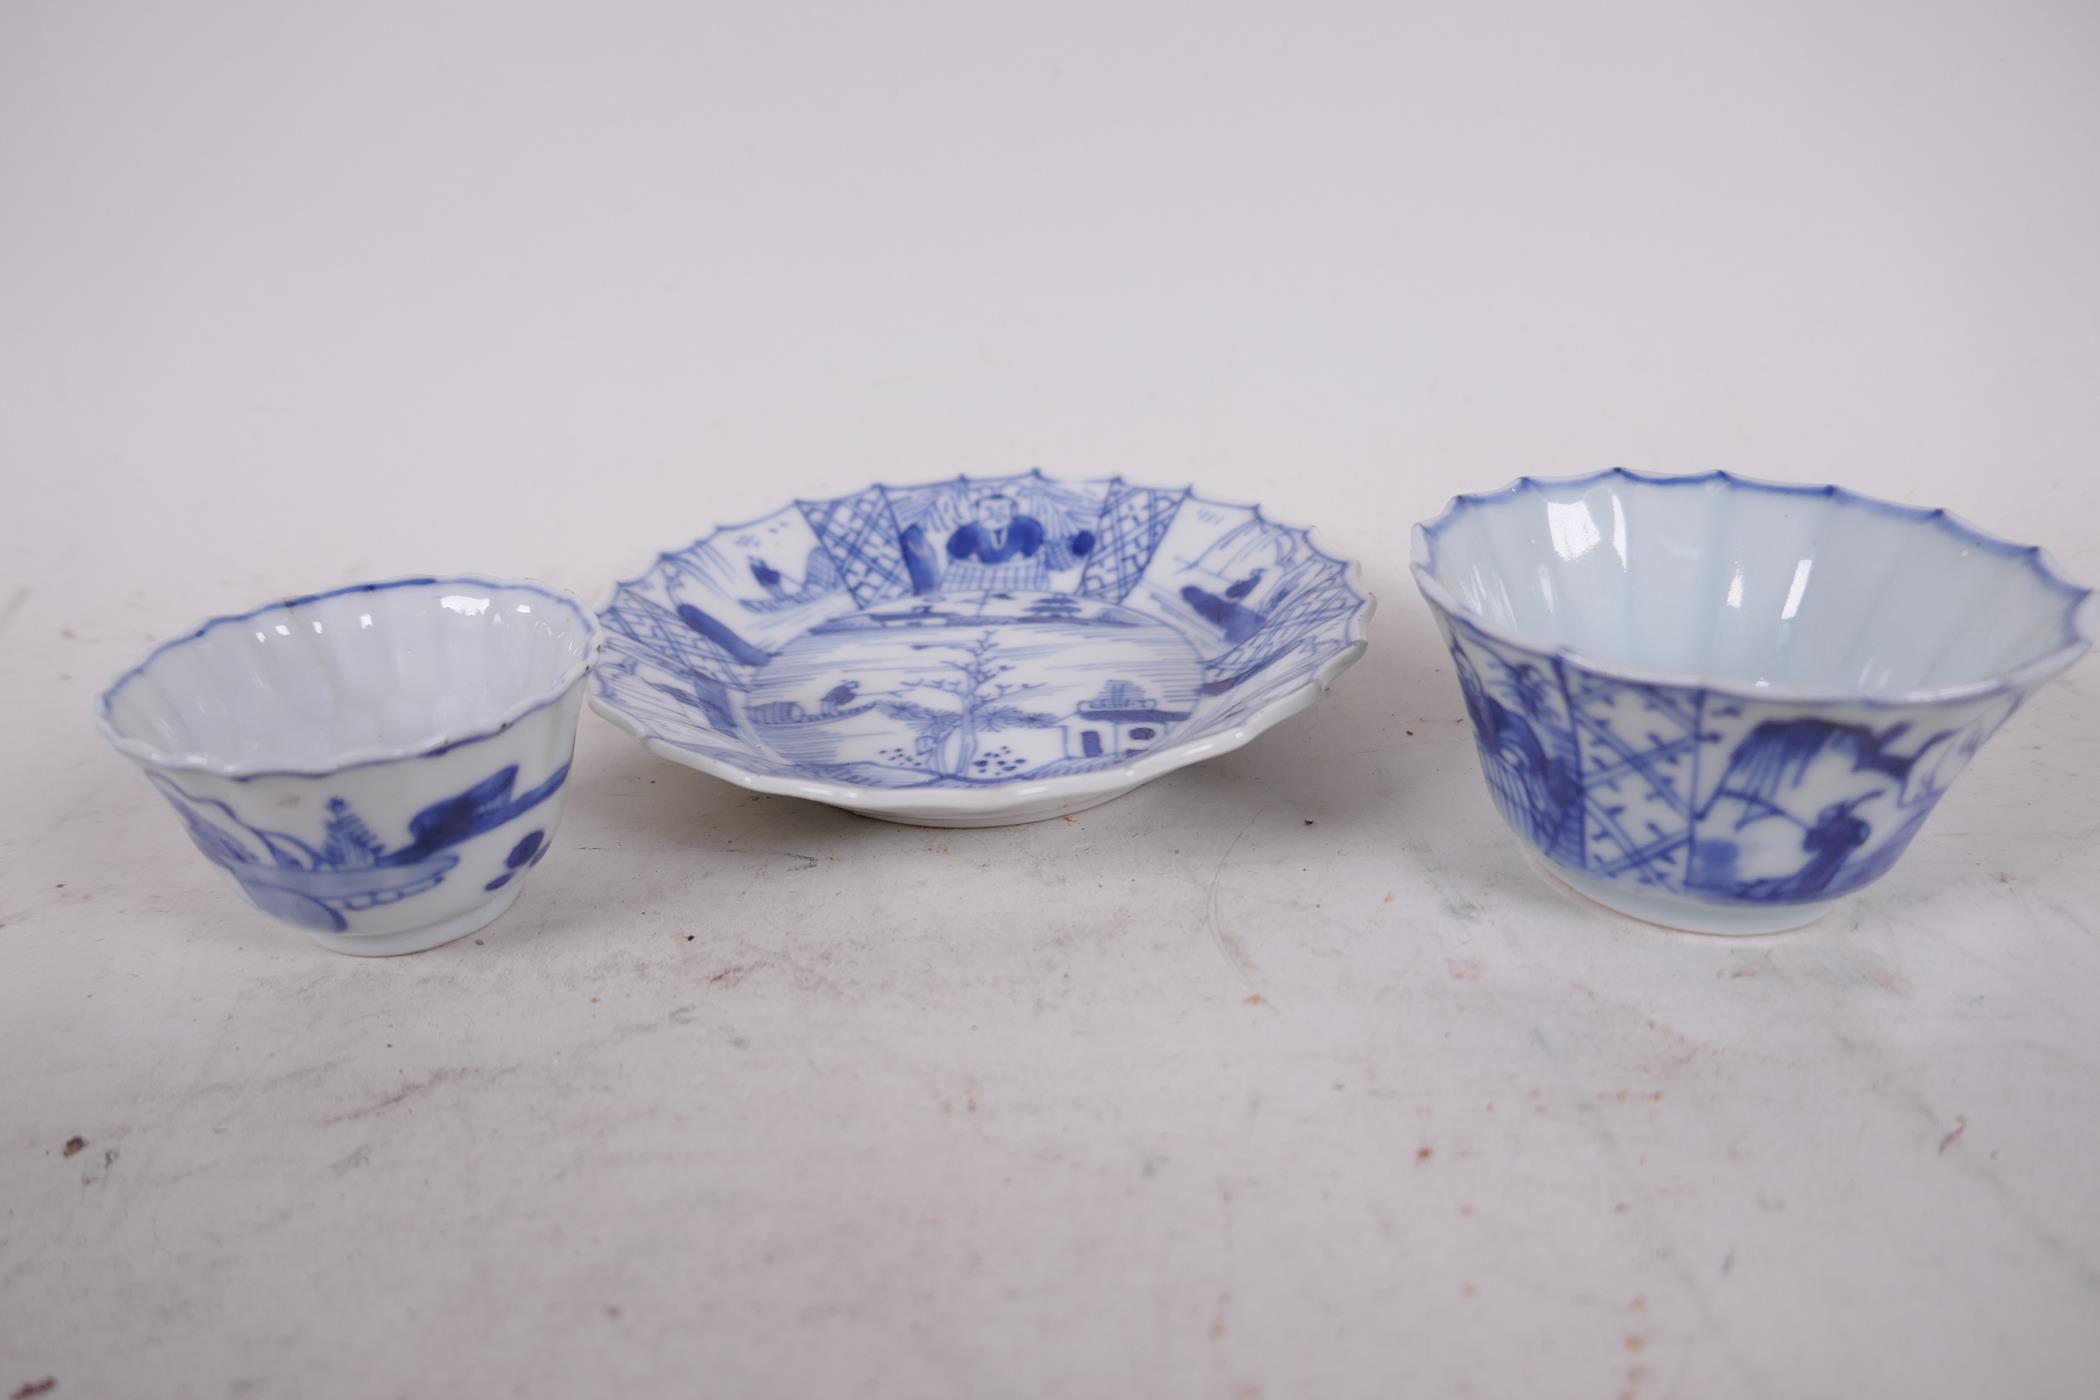 Two Chinese Yongzheng (1723-1735) blue and white fluted tea bowls with a matching saucer, saucer